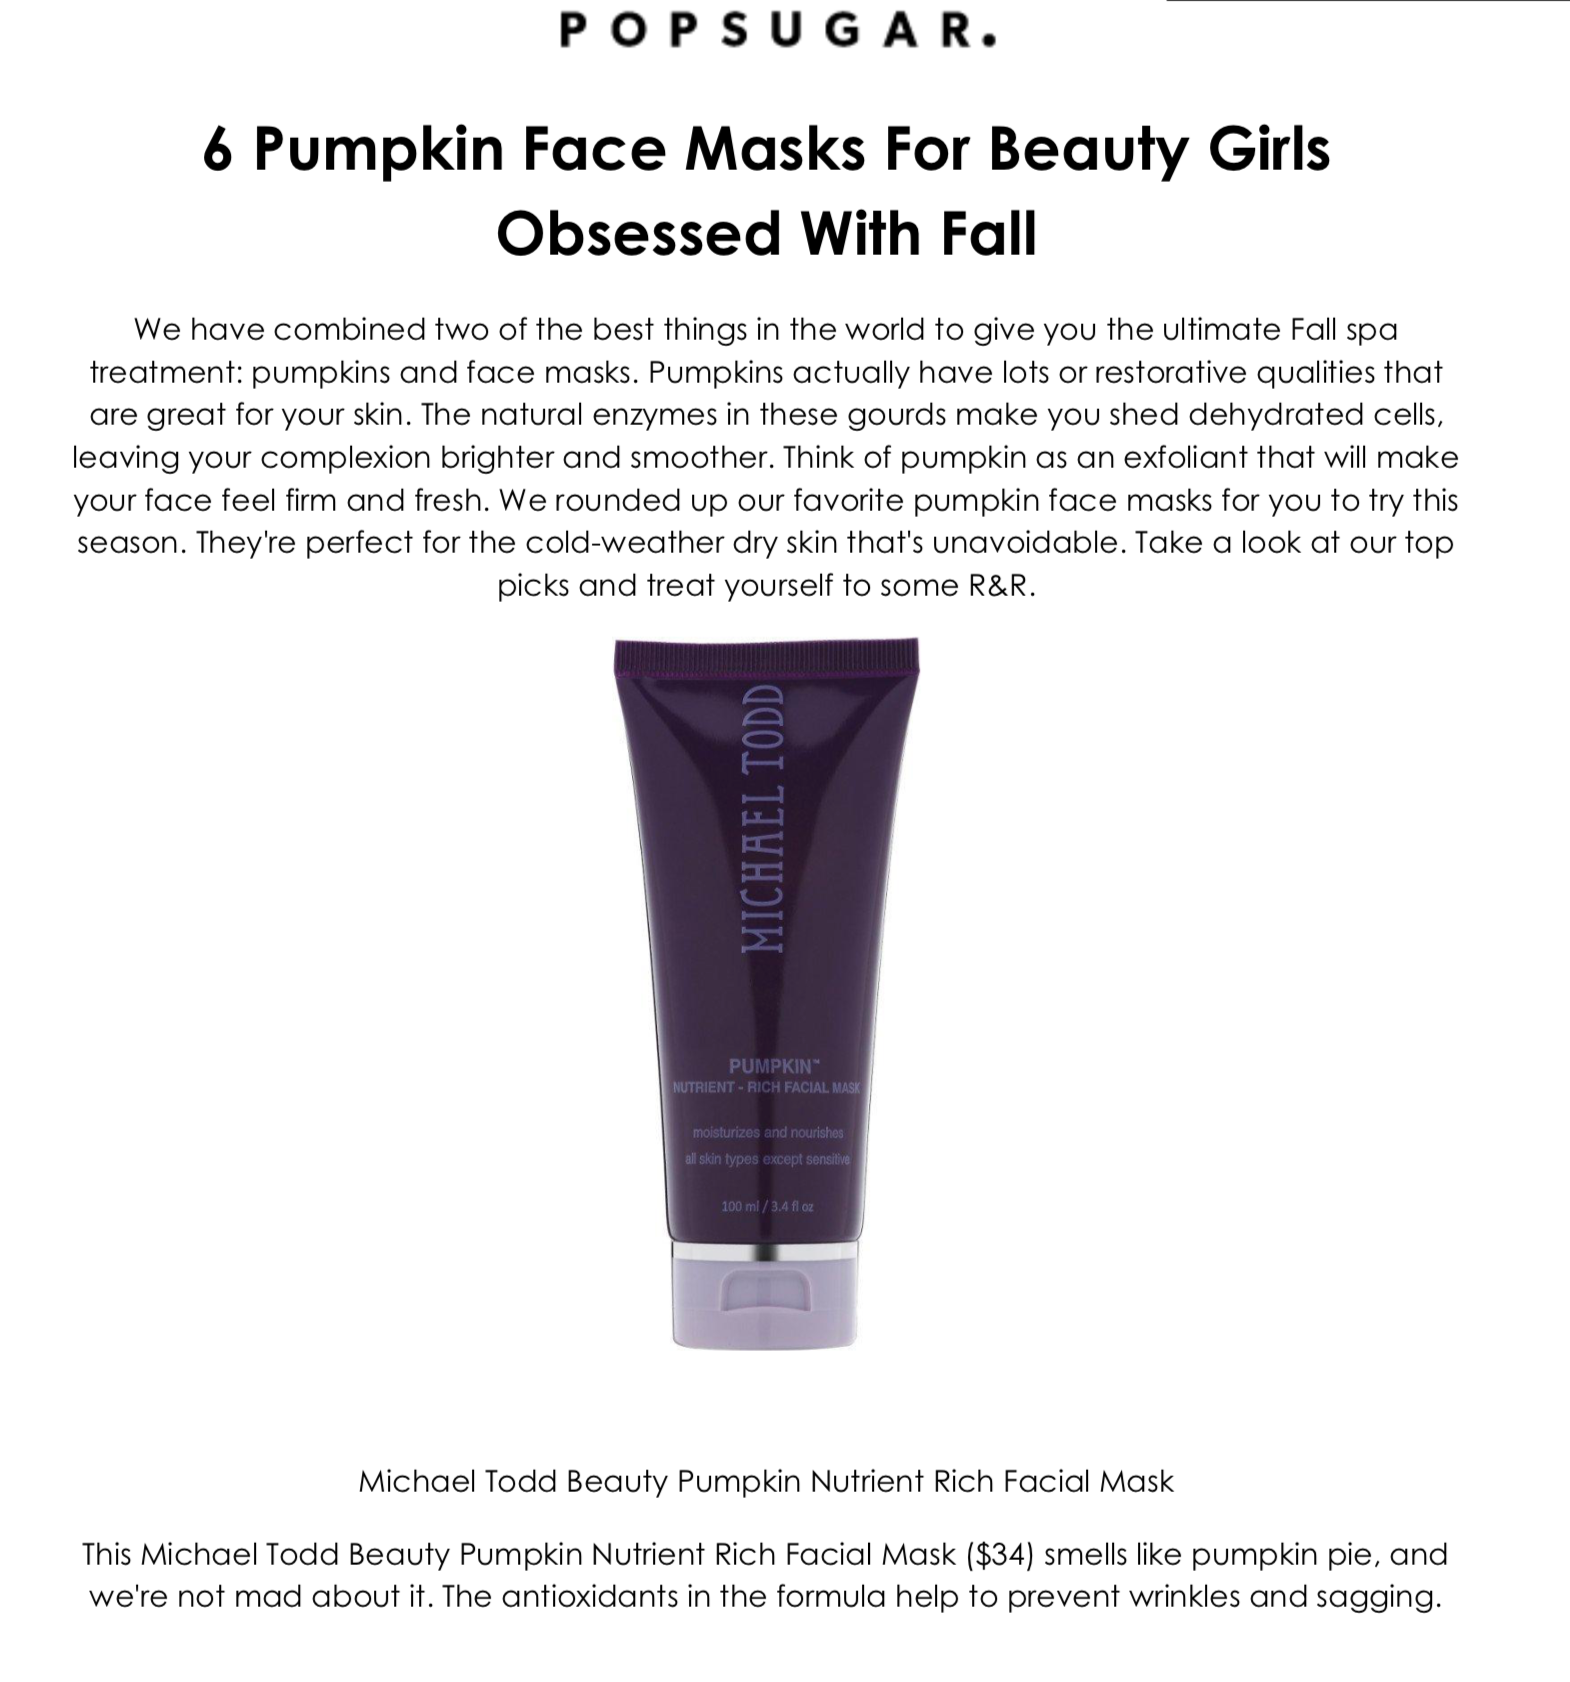 Pumpkin Face Masks For Beauty Girls Obsessed With Fall